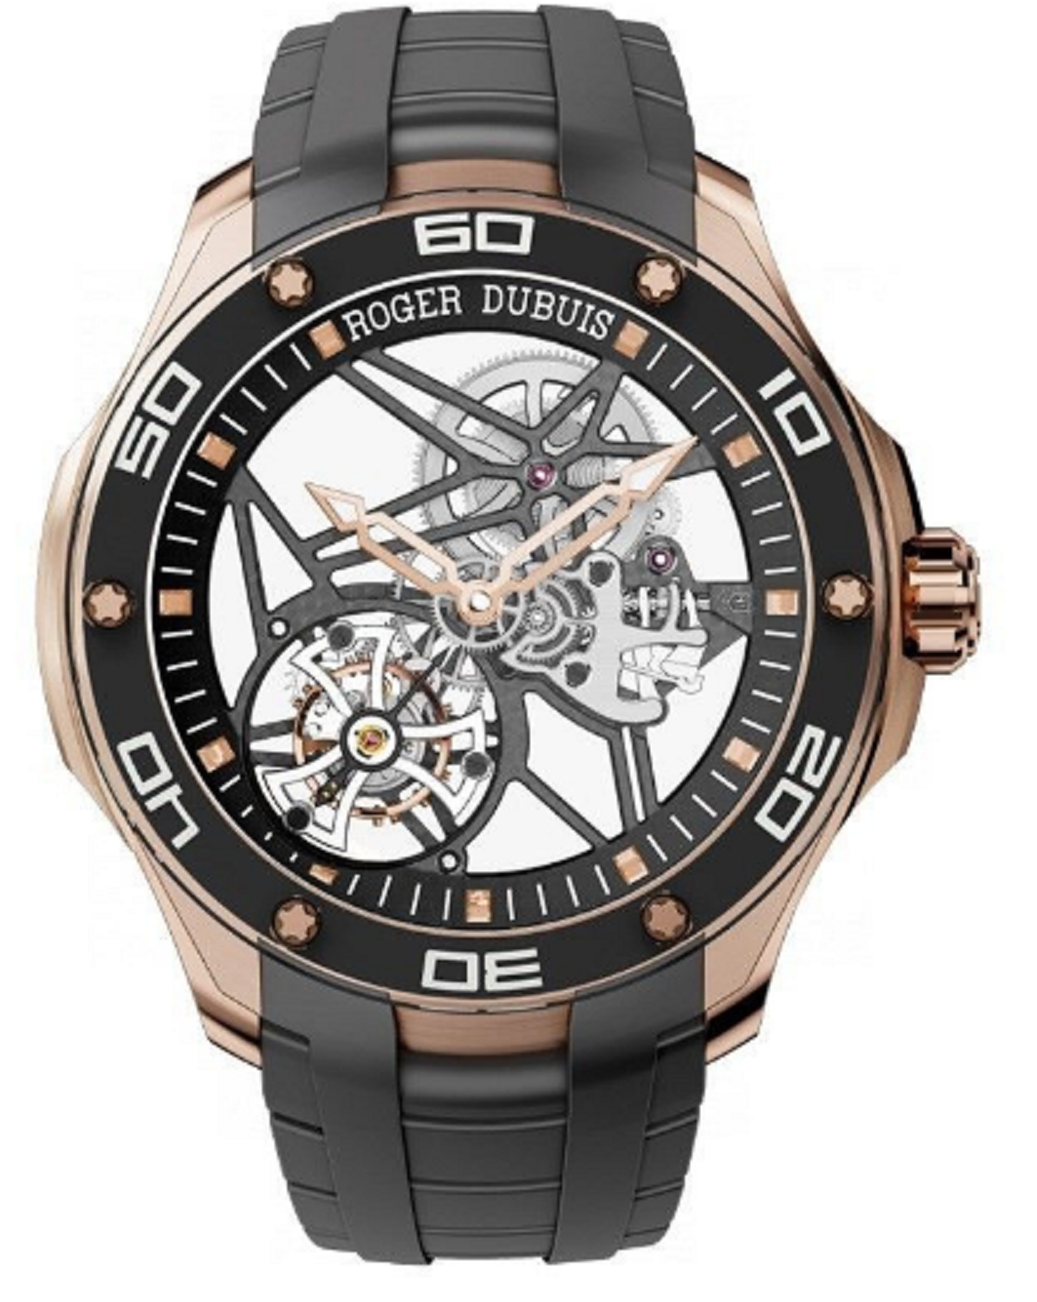 replica roger dubuis pulsion skeleton pulsion skeleton flying tourbillon in rose gold - limited edition of 188 pieces rddbpu0001 rddbpu0001 watches